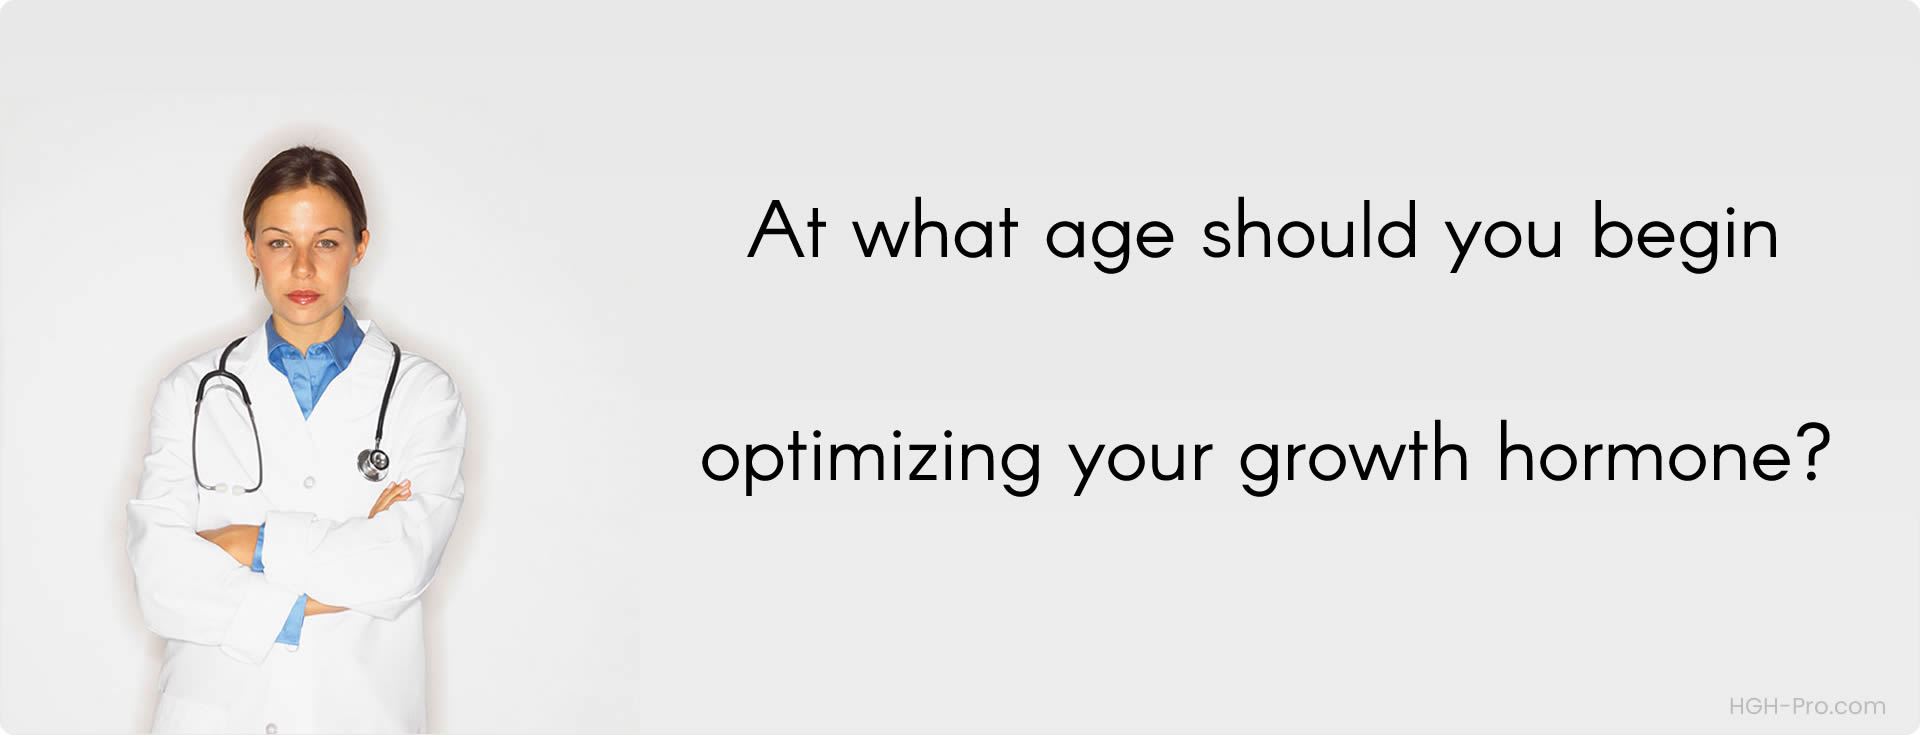 At what age should you begin optimizing HGH?